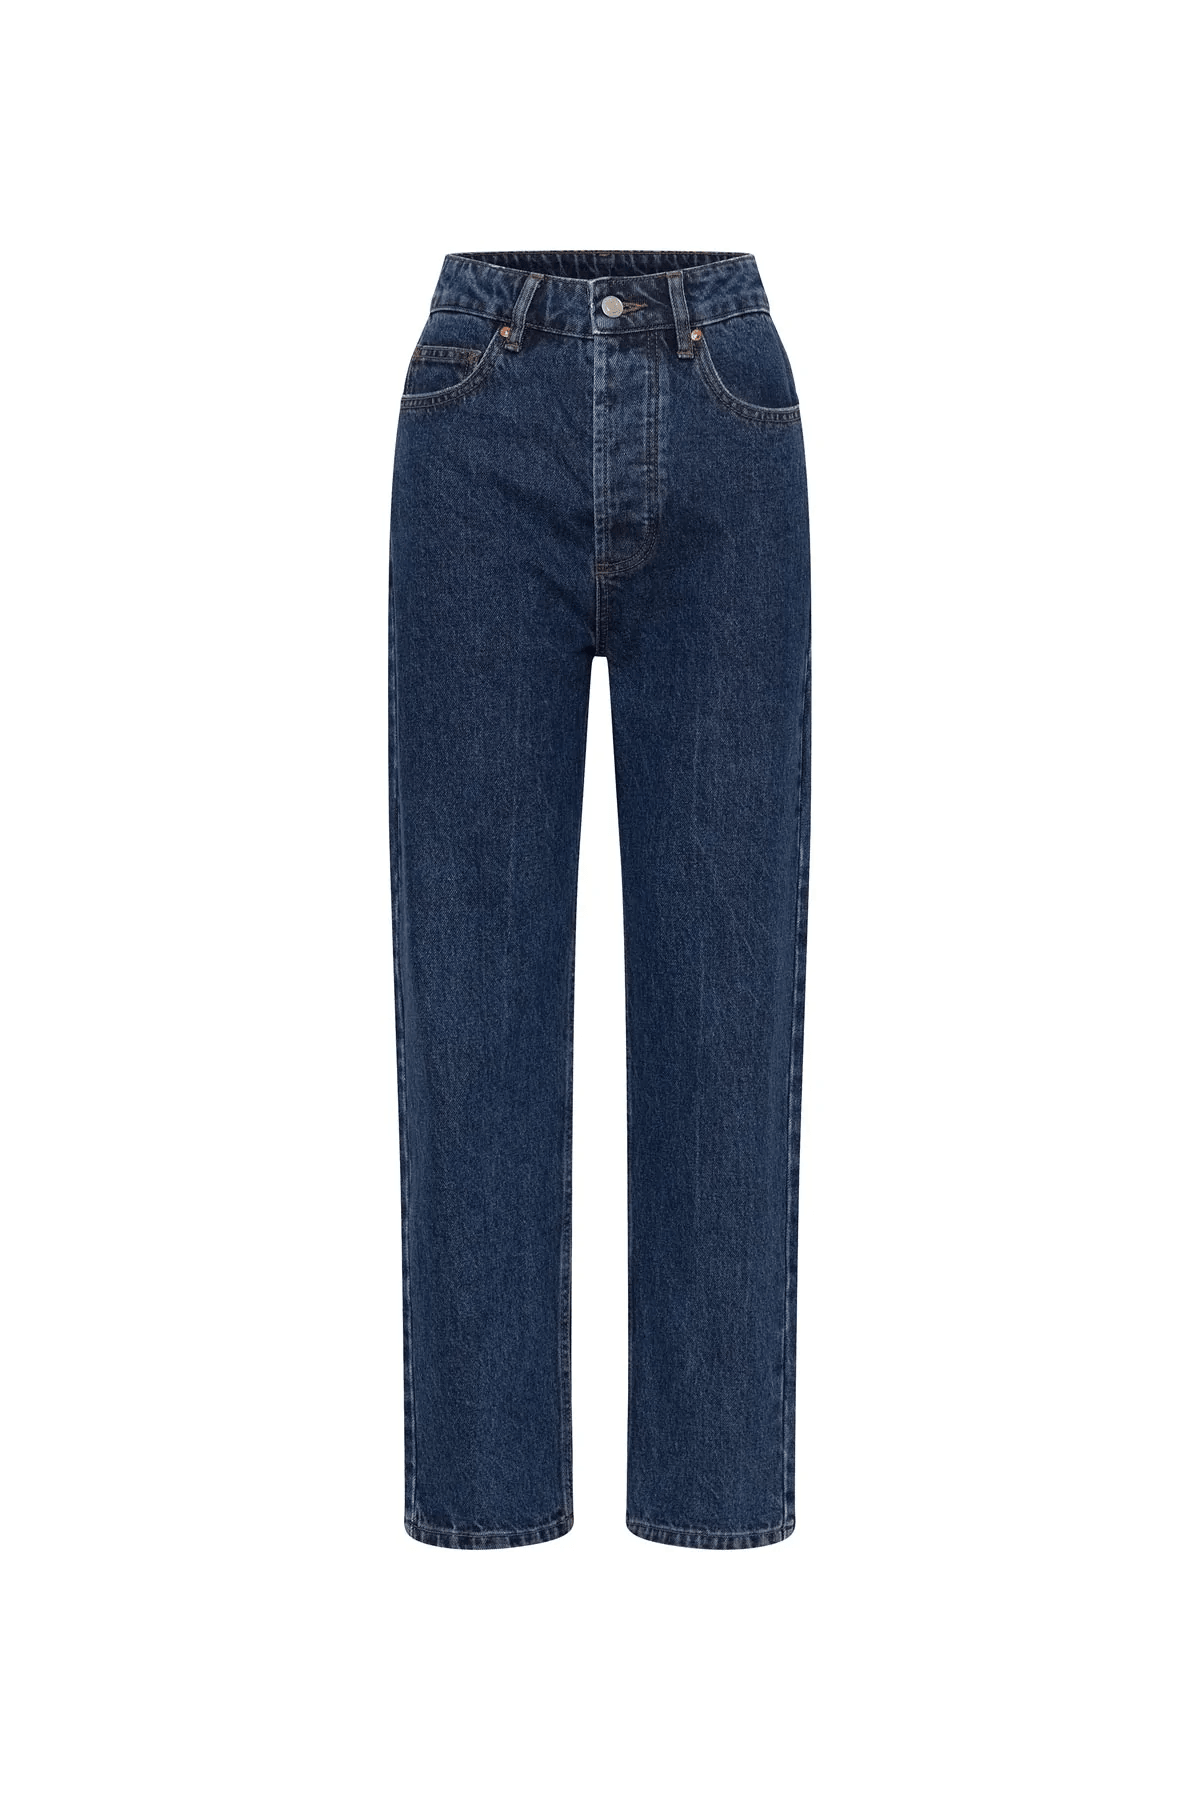 Camilla and Marc Betty Denim Jeans - The Iconic Issue